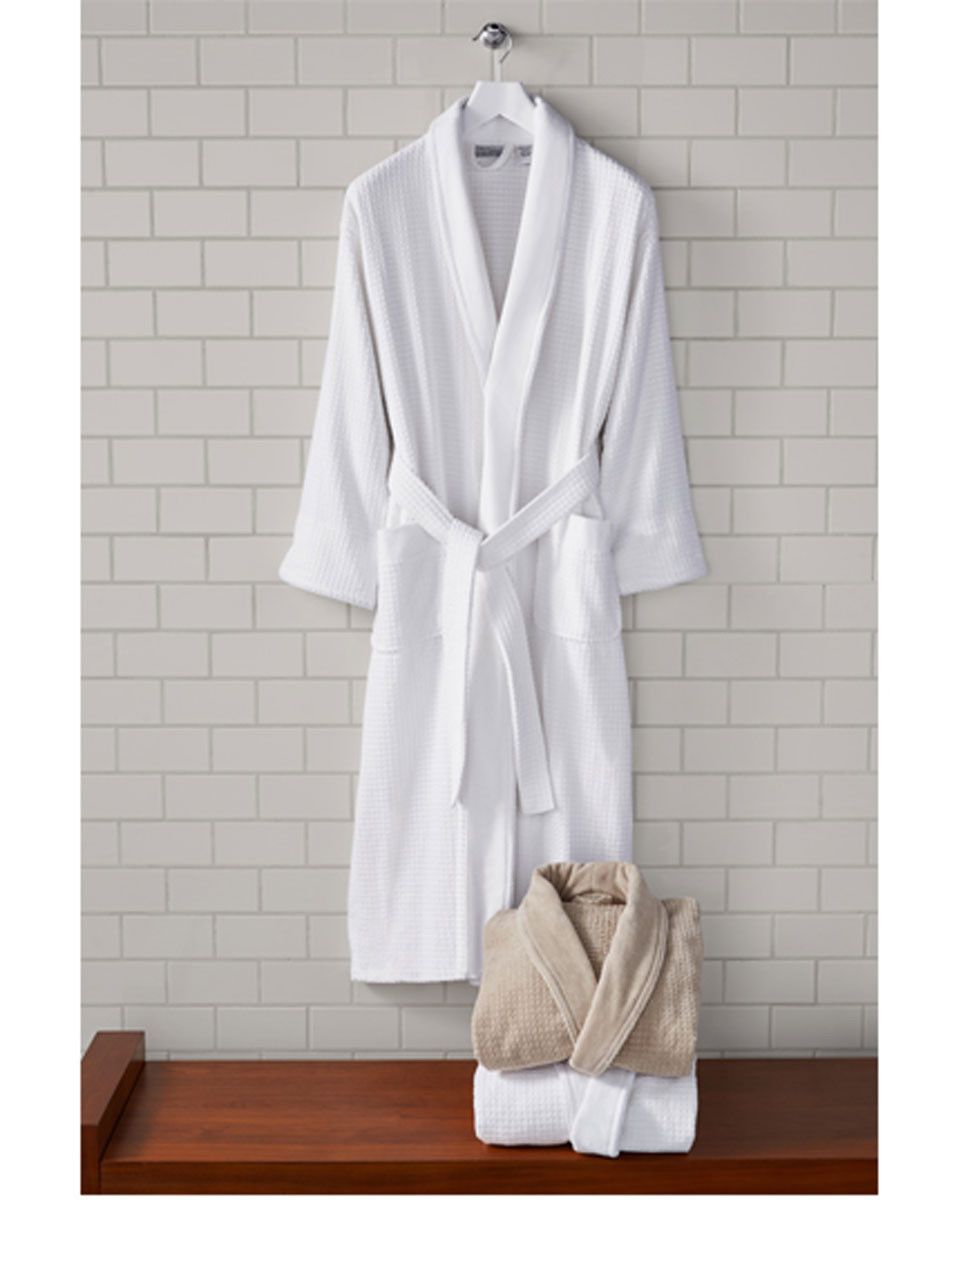 What is the weight of the 1concier Platinum Shawl Collar Robe?